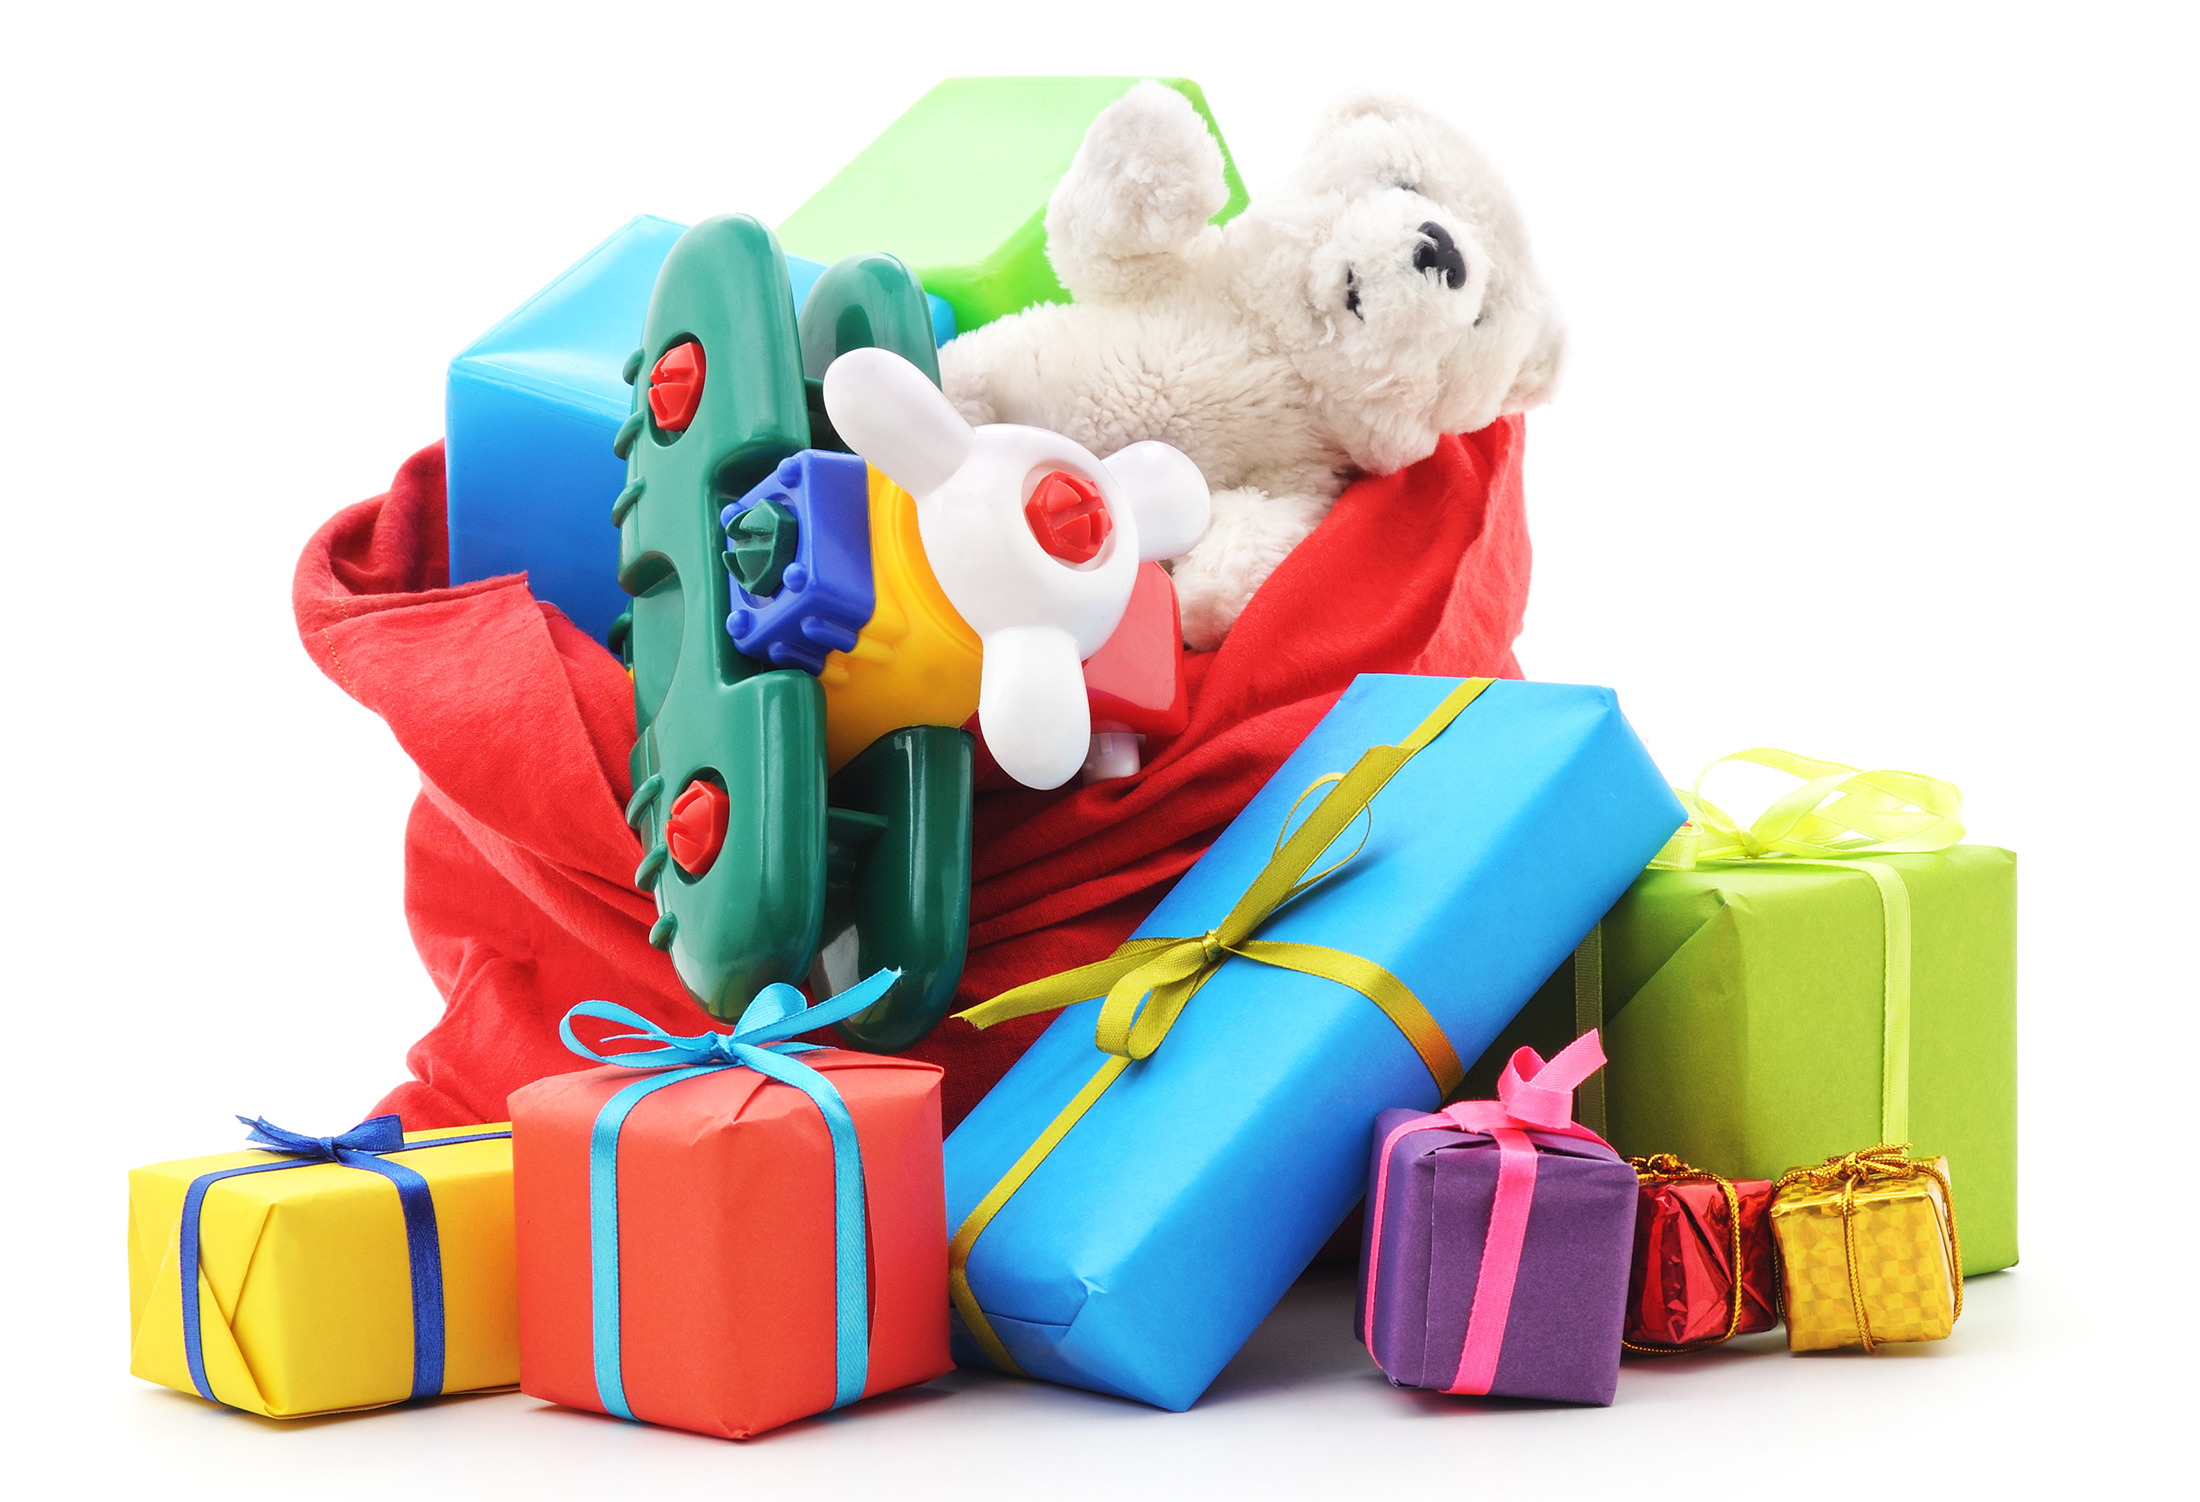 Stack of colorful wrapped presents and a plush teddy bear